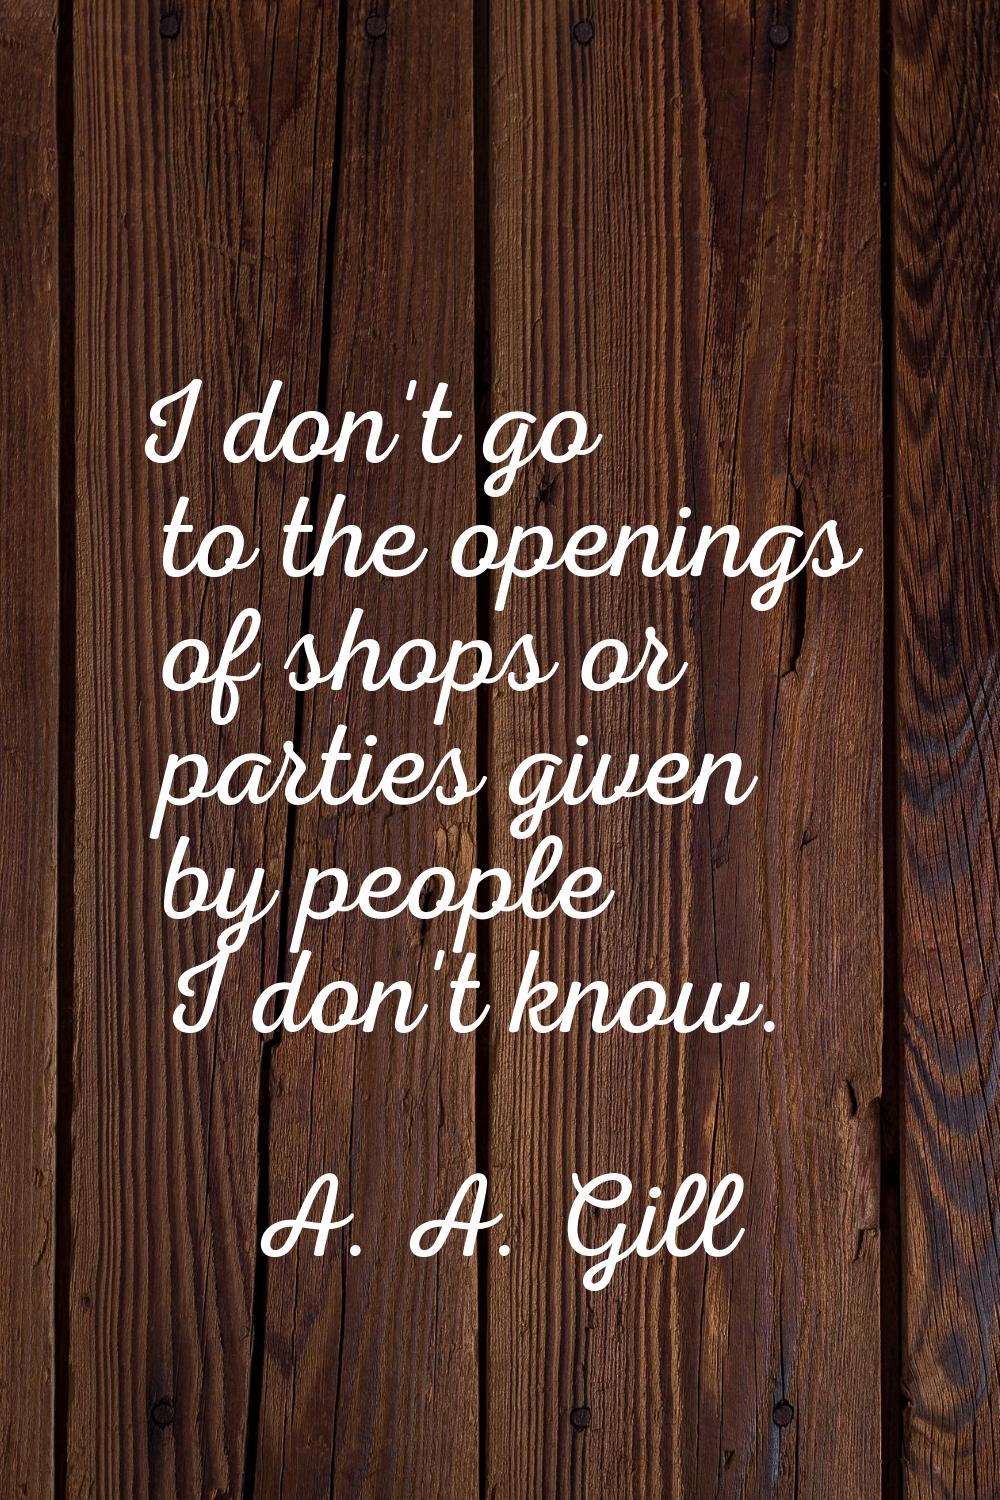 I don't go to the openings of shops or parties given by people I don't know.